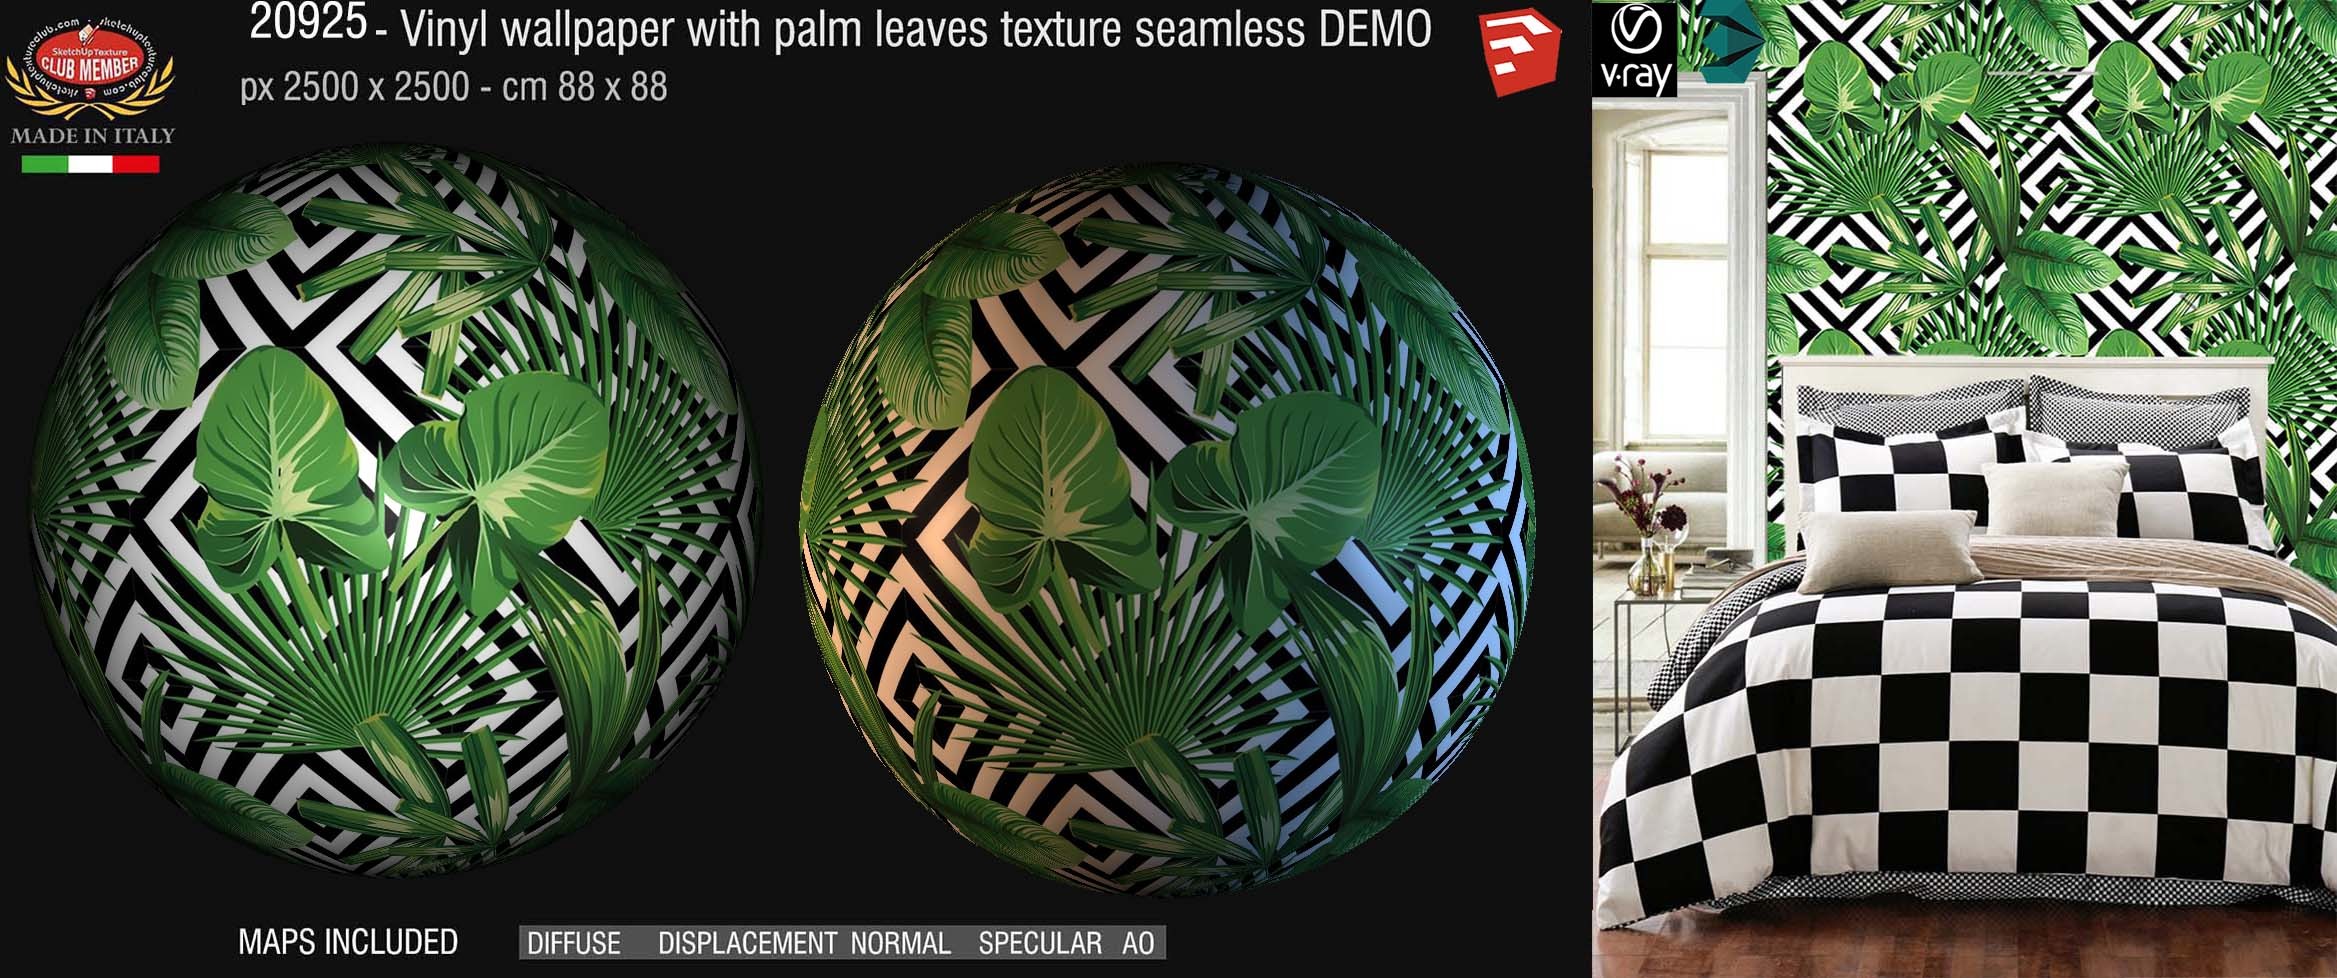 20925 Vinyl Wallpaper With Palm Leaves Pbr Texture - Houseplant - HD Wallpaper 